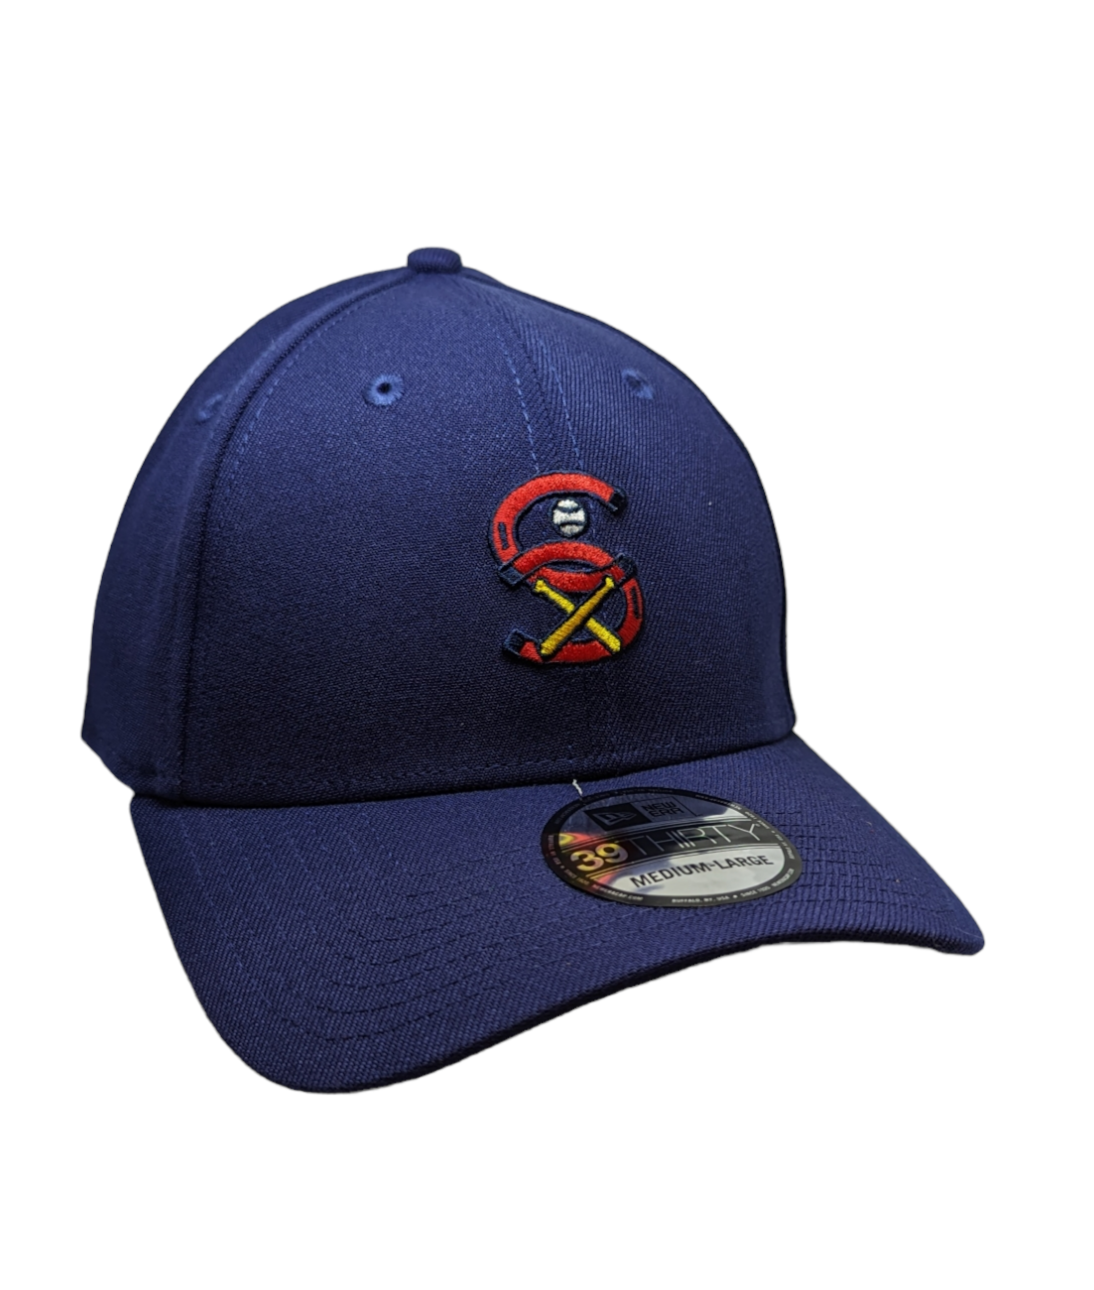 Chicago White Sox Classic 1932 Alternate Cooperstown Collection Navy 39THIRTY Flex Fit New Era Hat